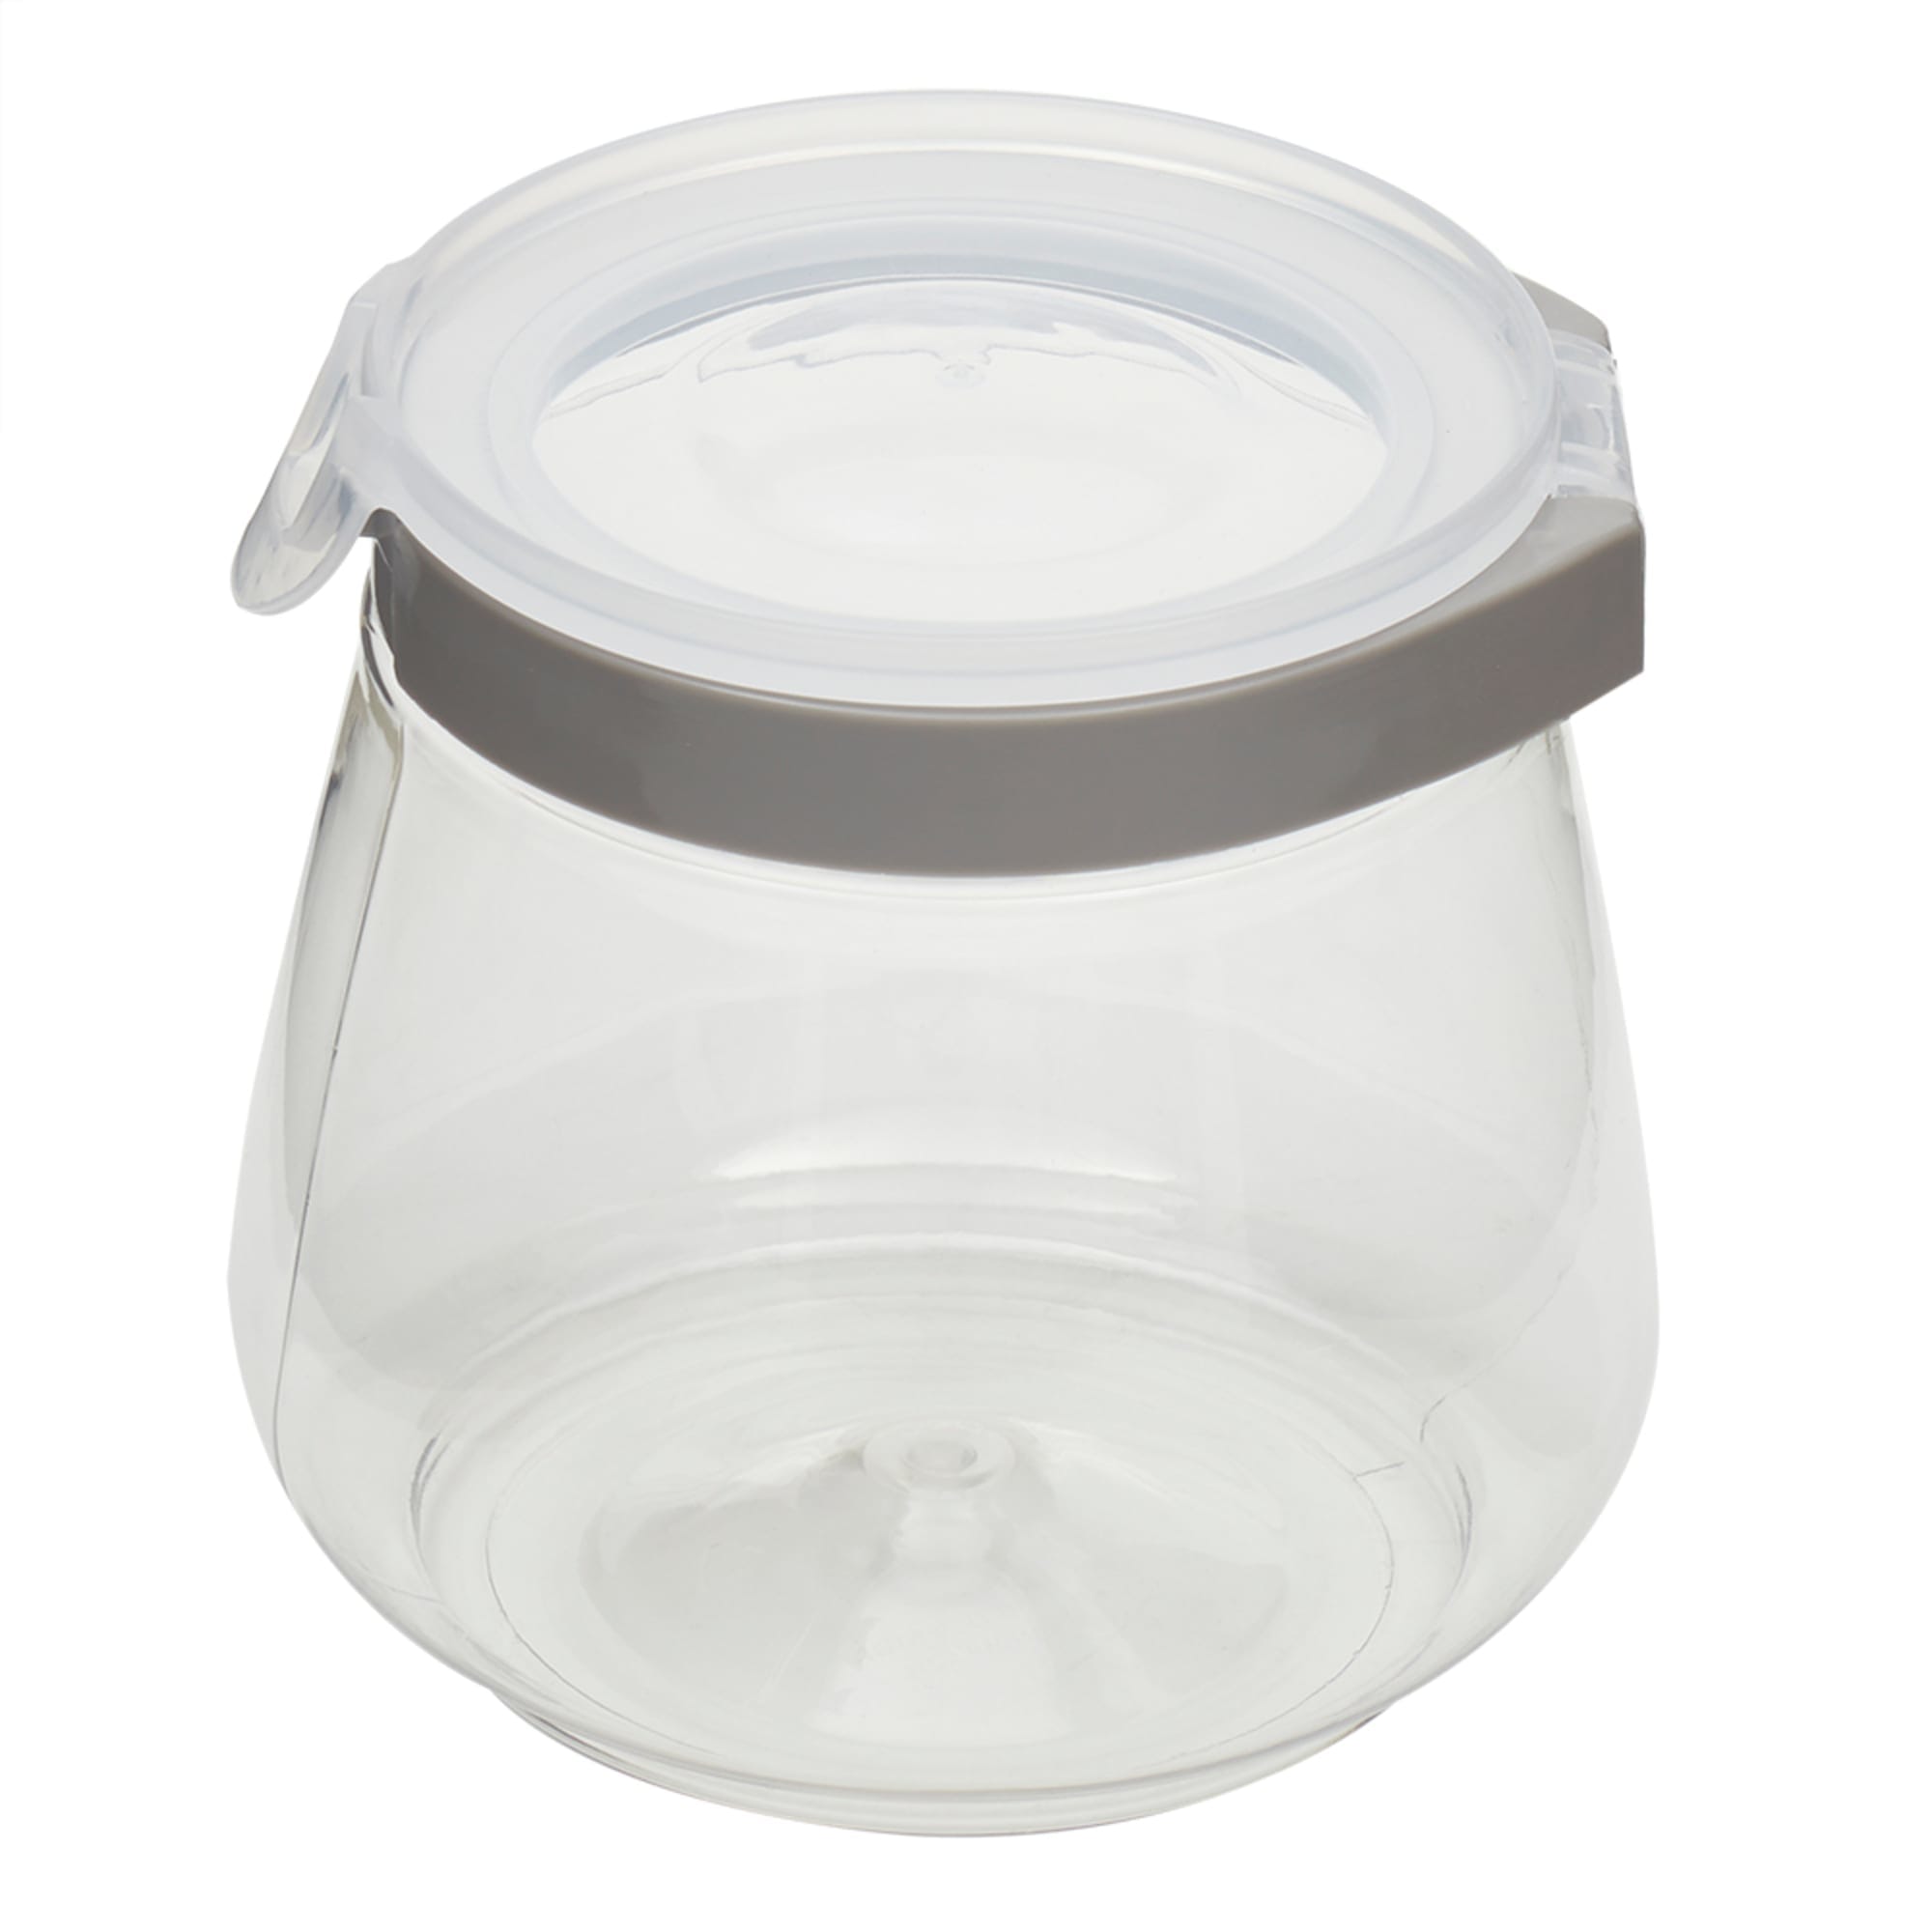 Home Basics 37 oz Plastic Flip Top Container, Clear $4.00 EACH, CASE PACK OF 6